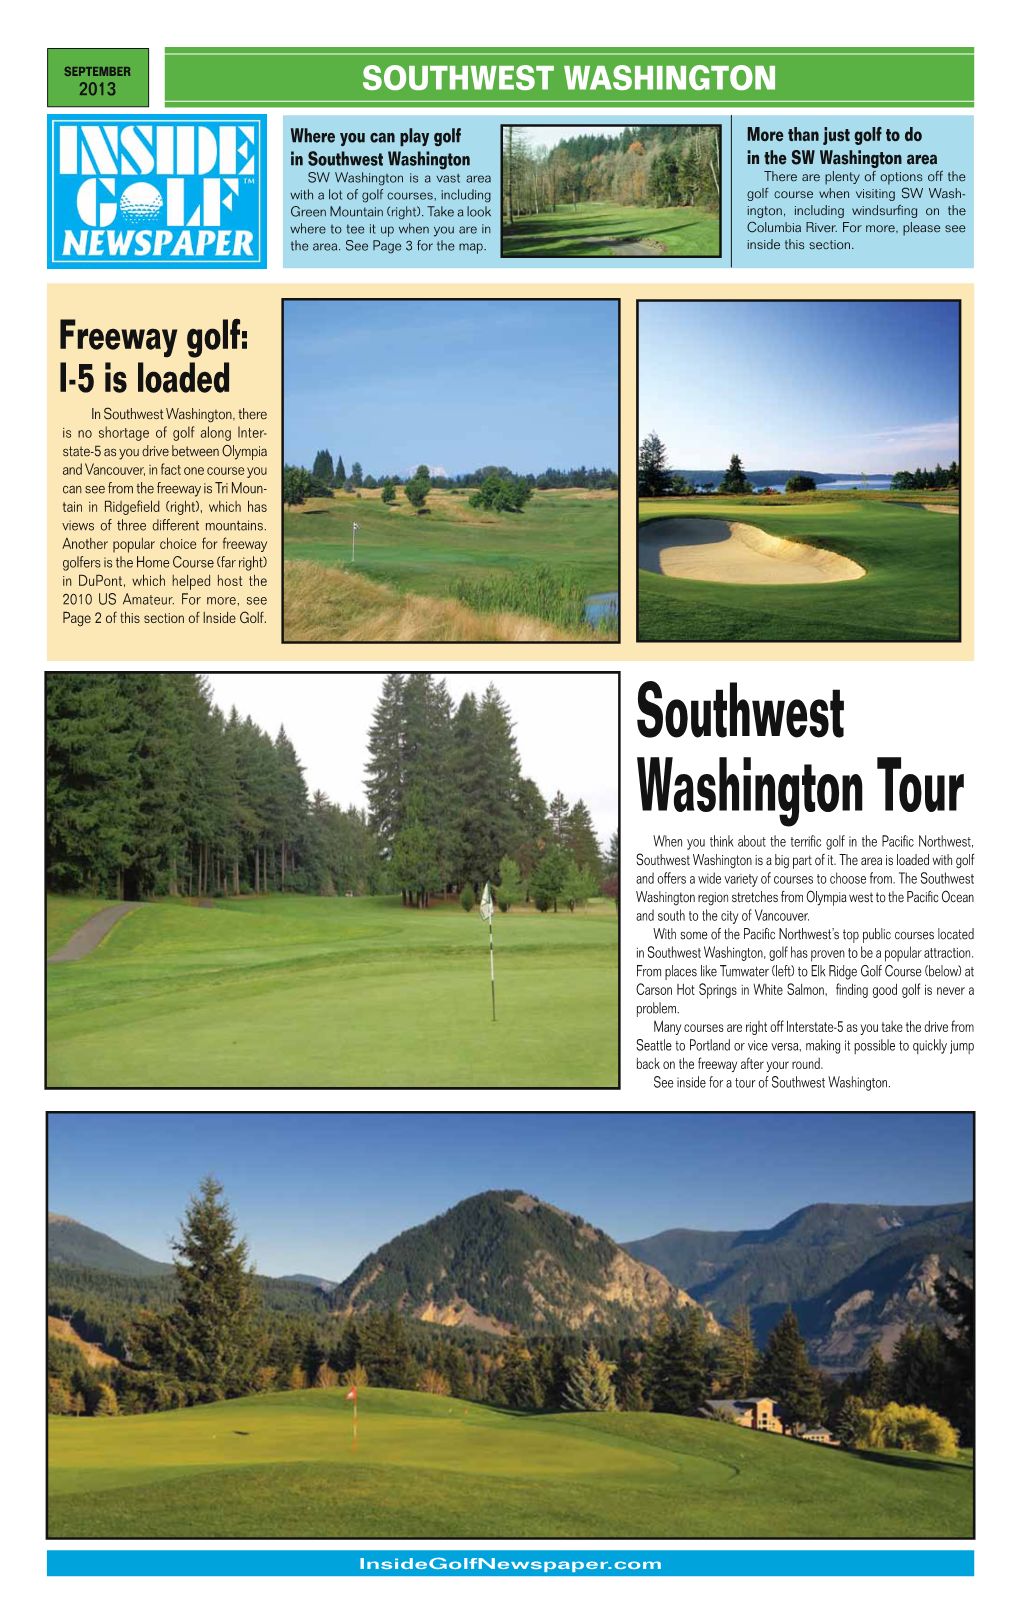 Southwest Washington Tour When You Think About the Terrific Golf in the Pacific Northwest, Southwest Washington Is a Big Part of It